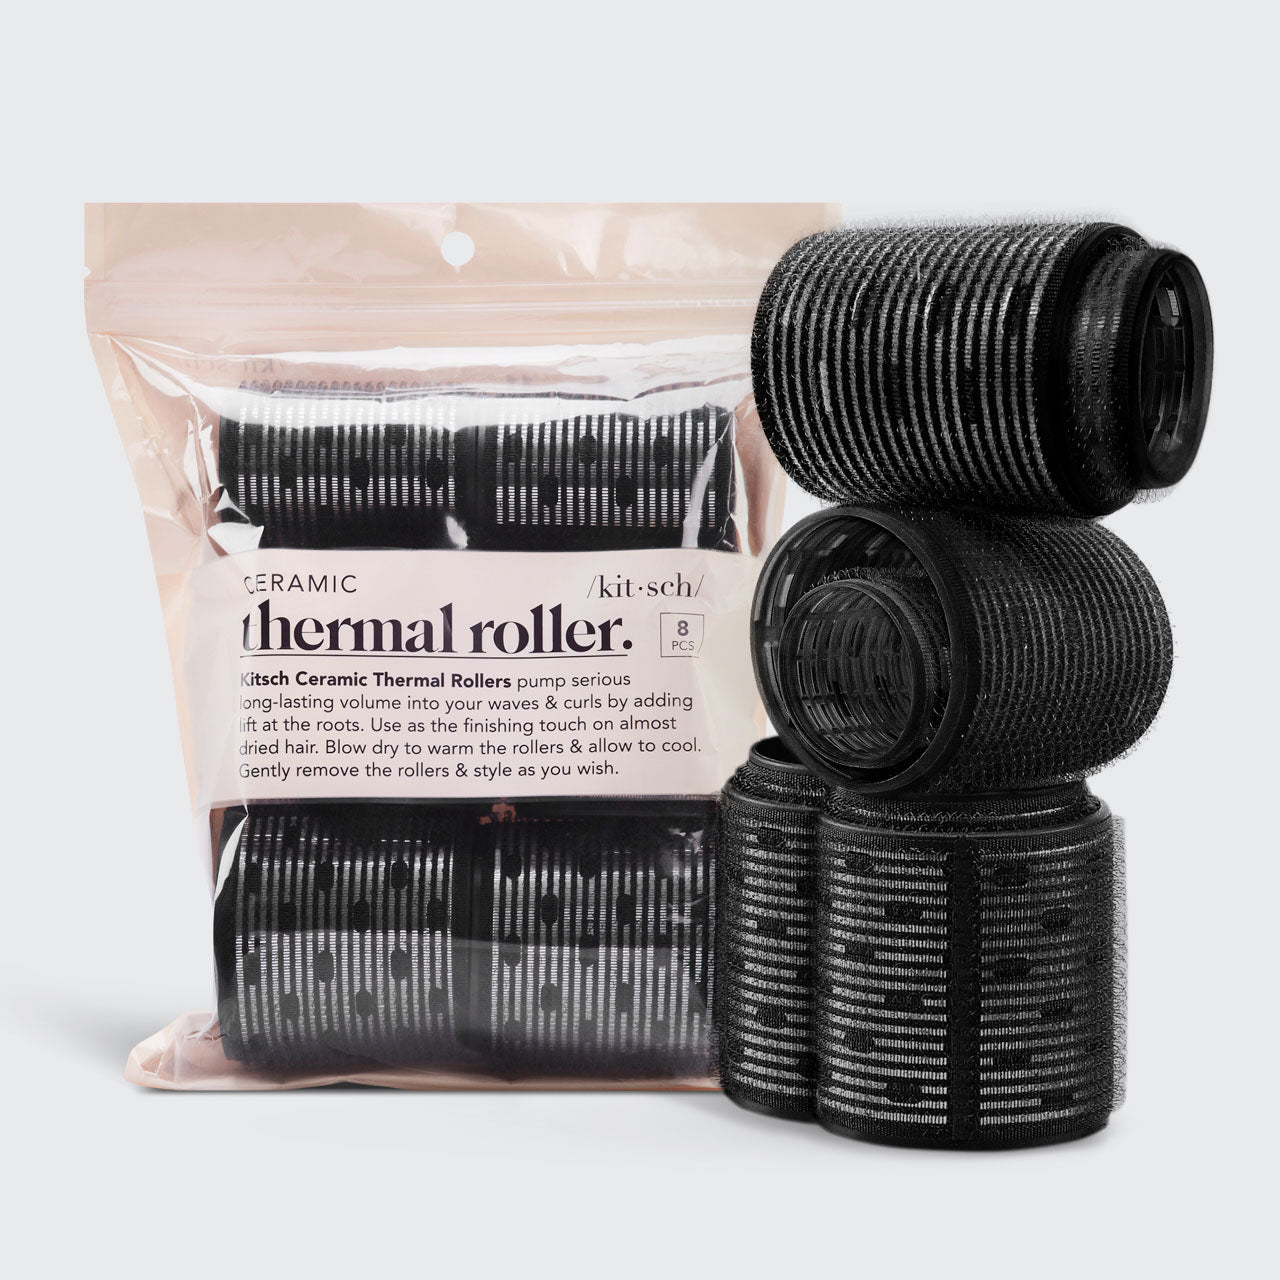 Kitsch Ceramic Thermal Rollers 8 piece